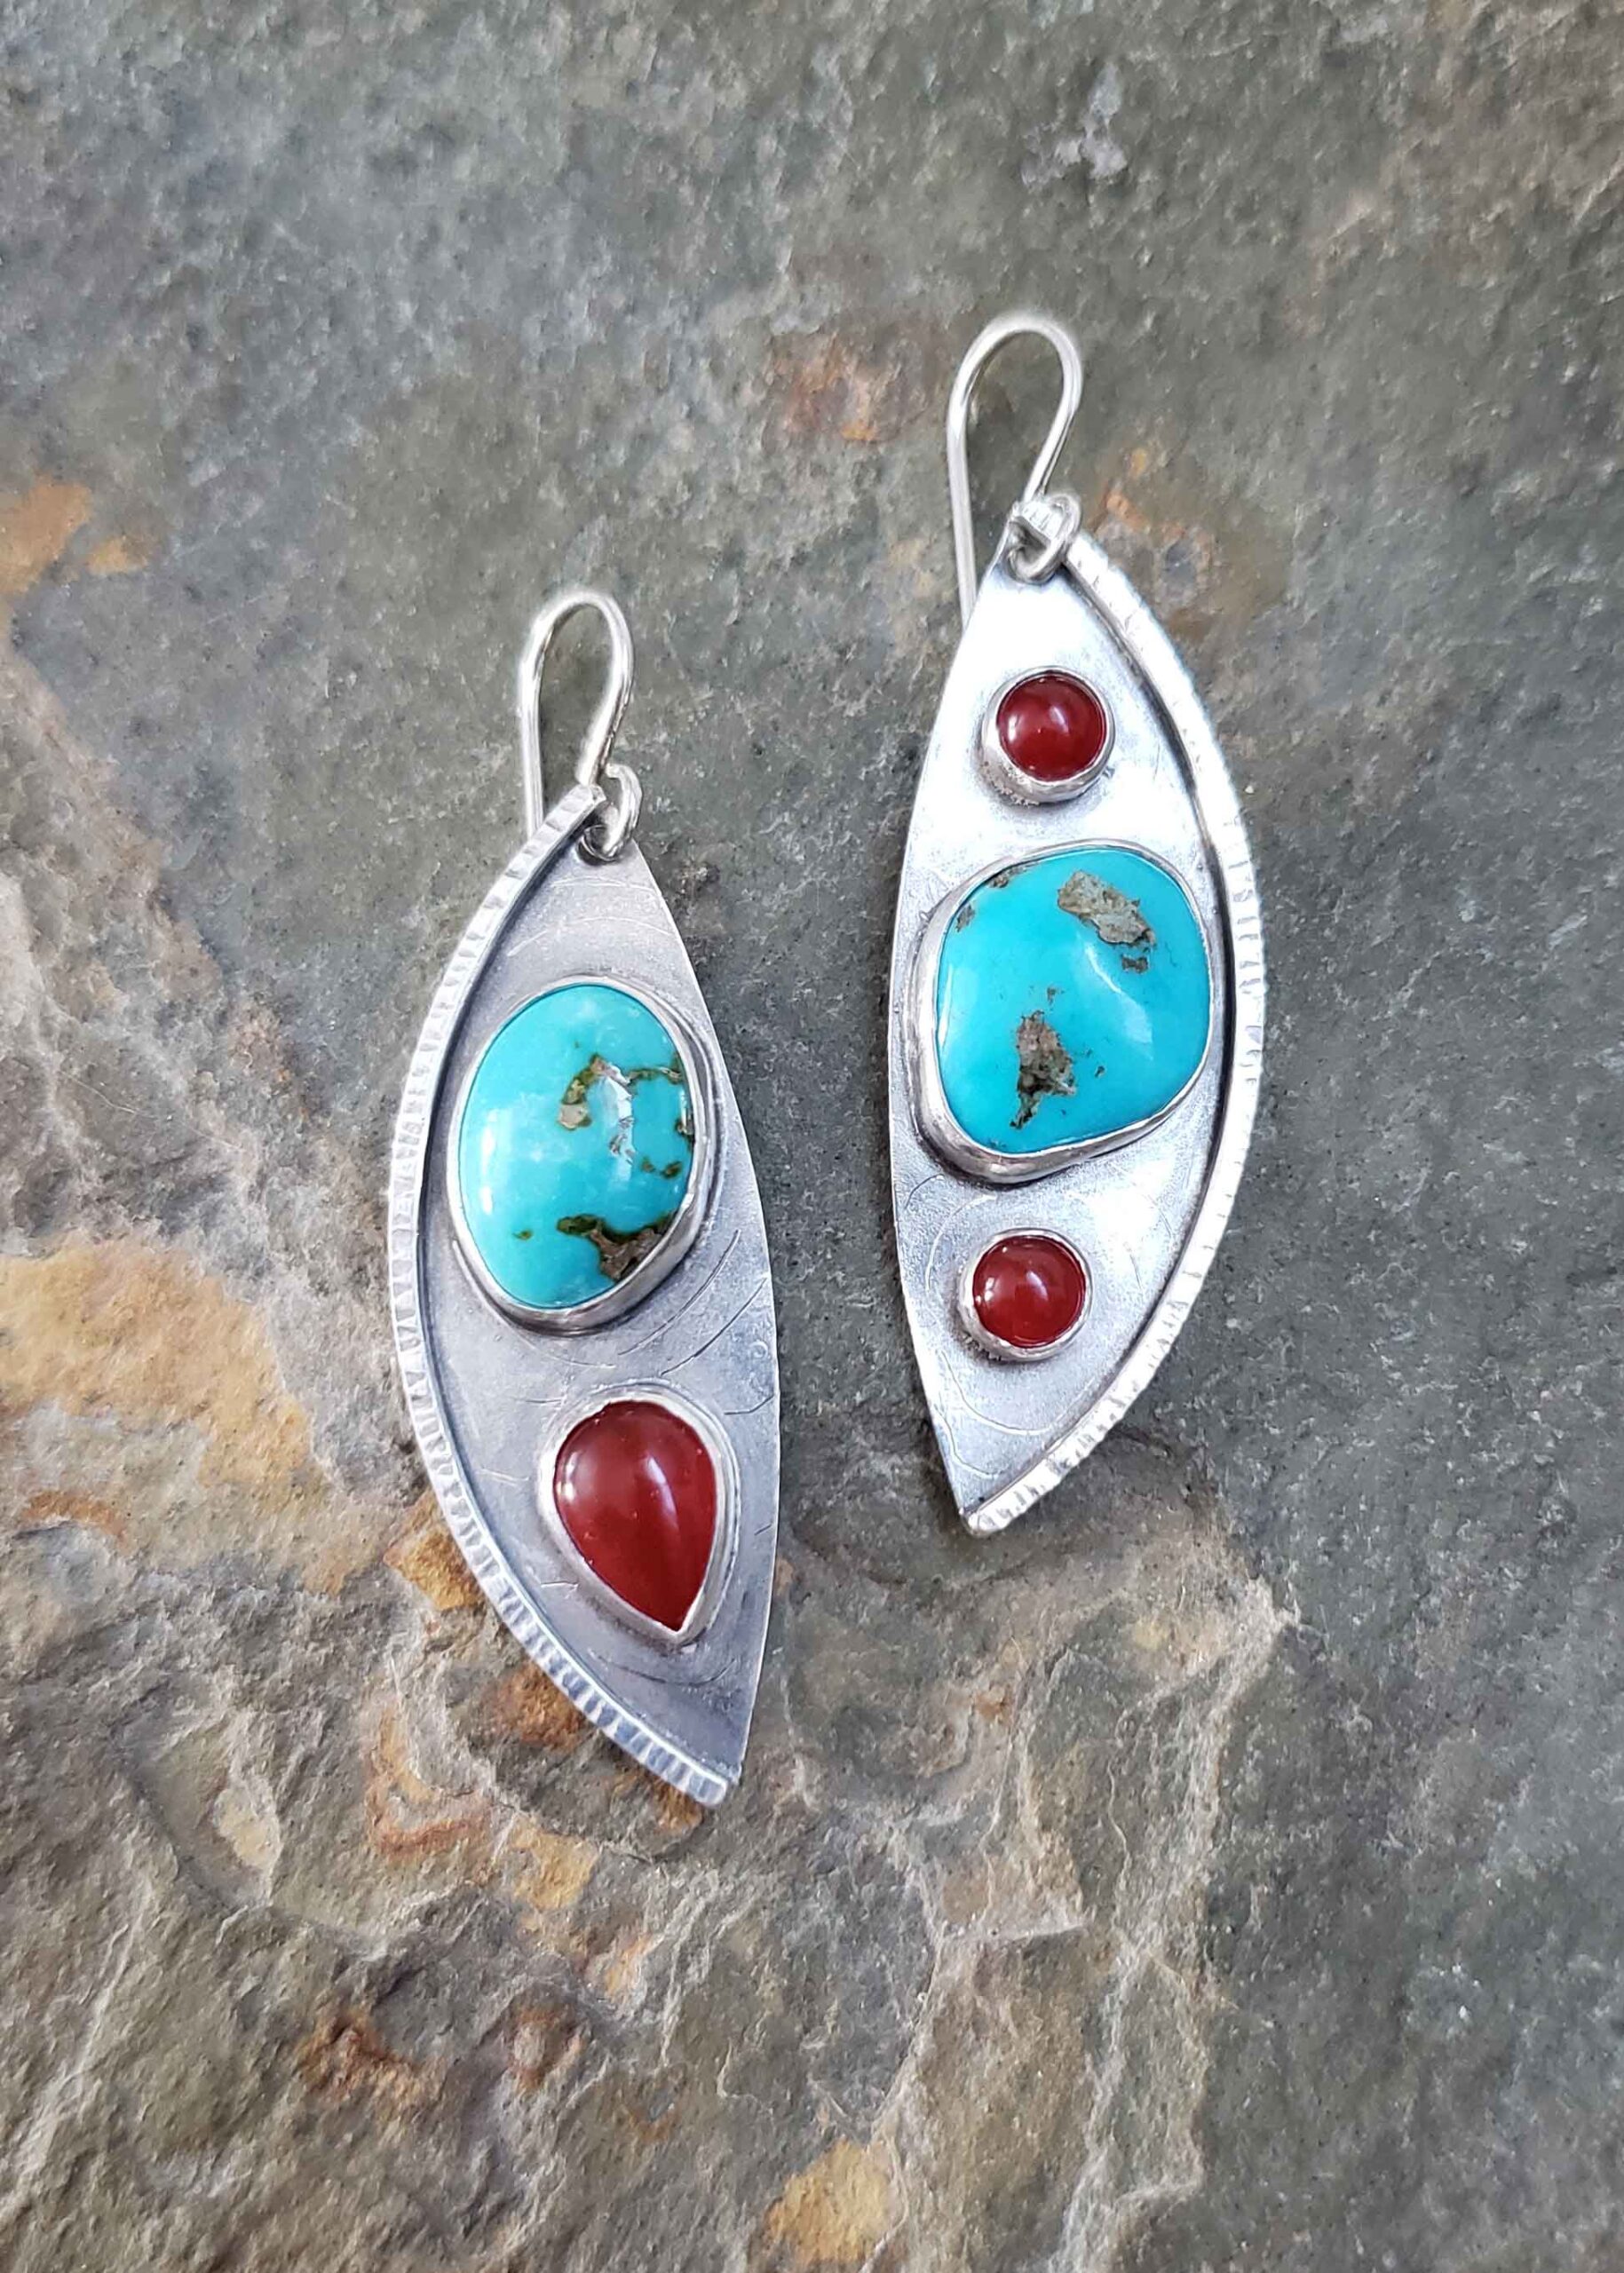 Silver, turquois and red carnelian contemporary earrings by Dona Miller.